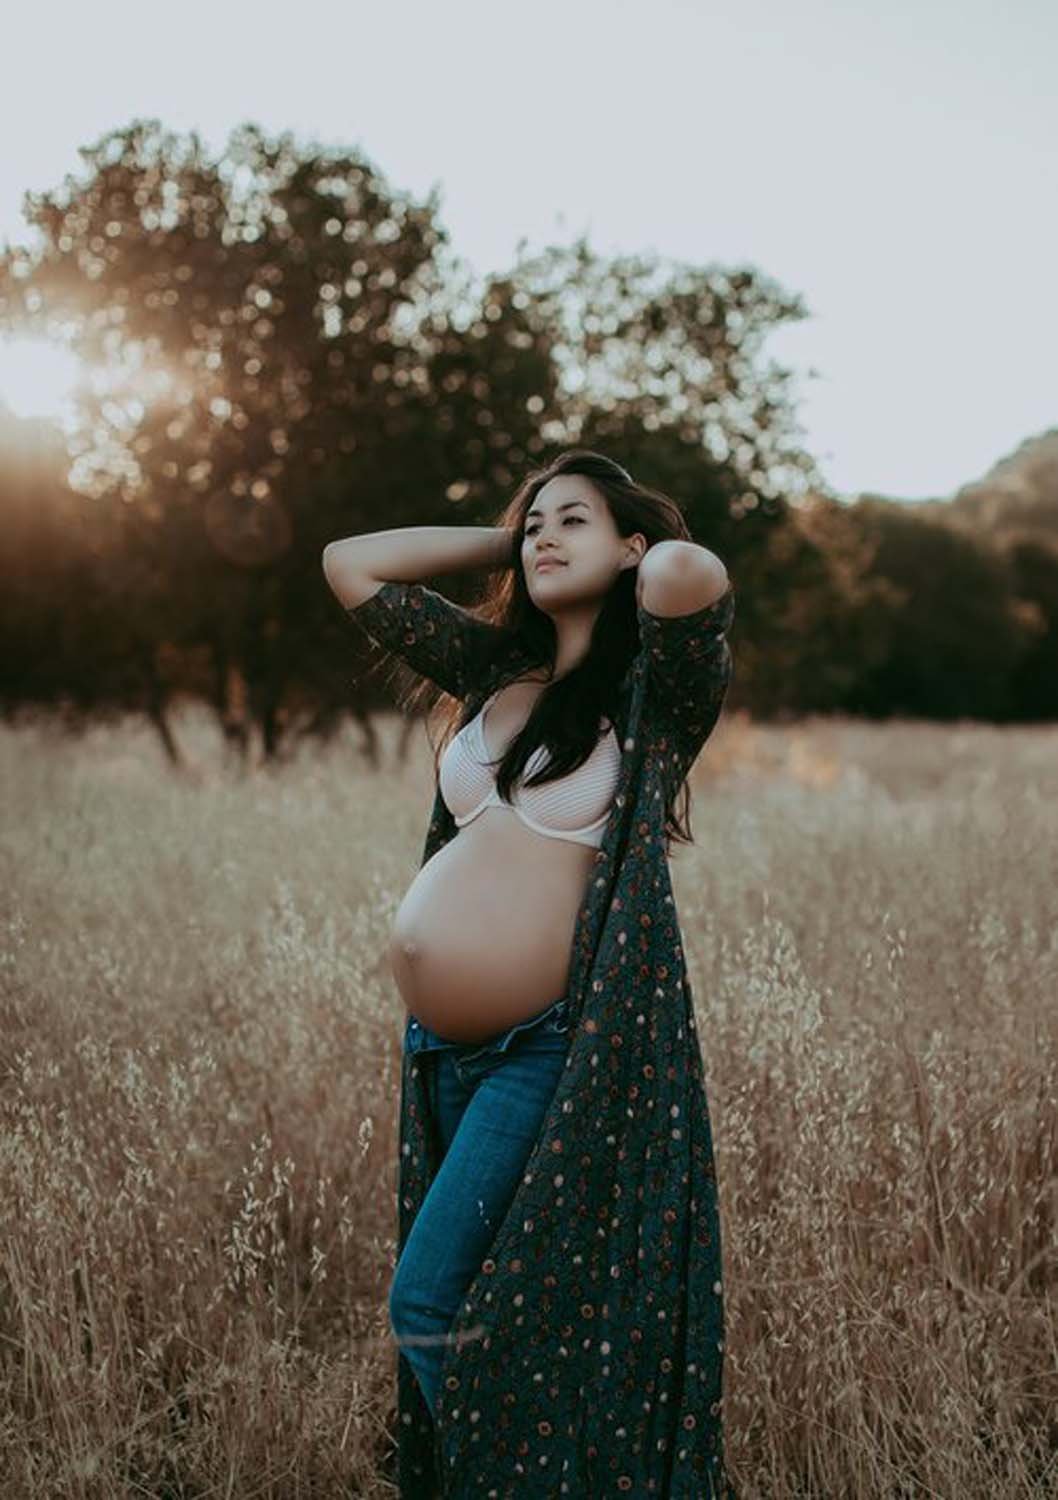 Young pregnant woman in field at sunset Sacramento pregnancy shoot photos.jpg